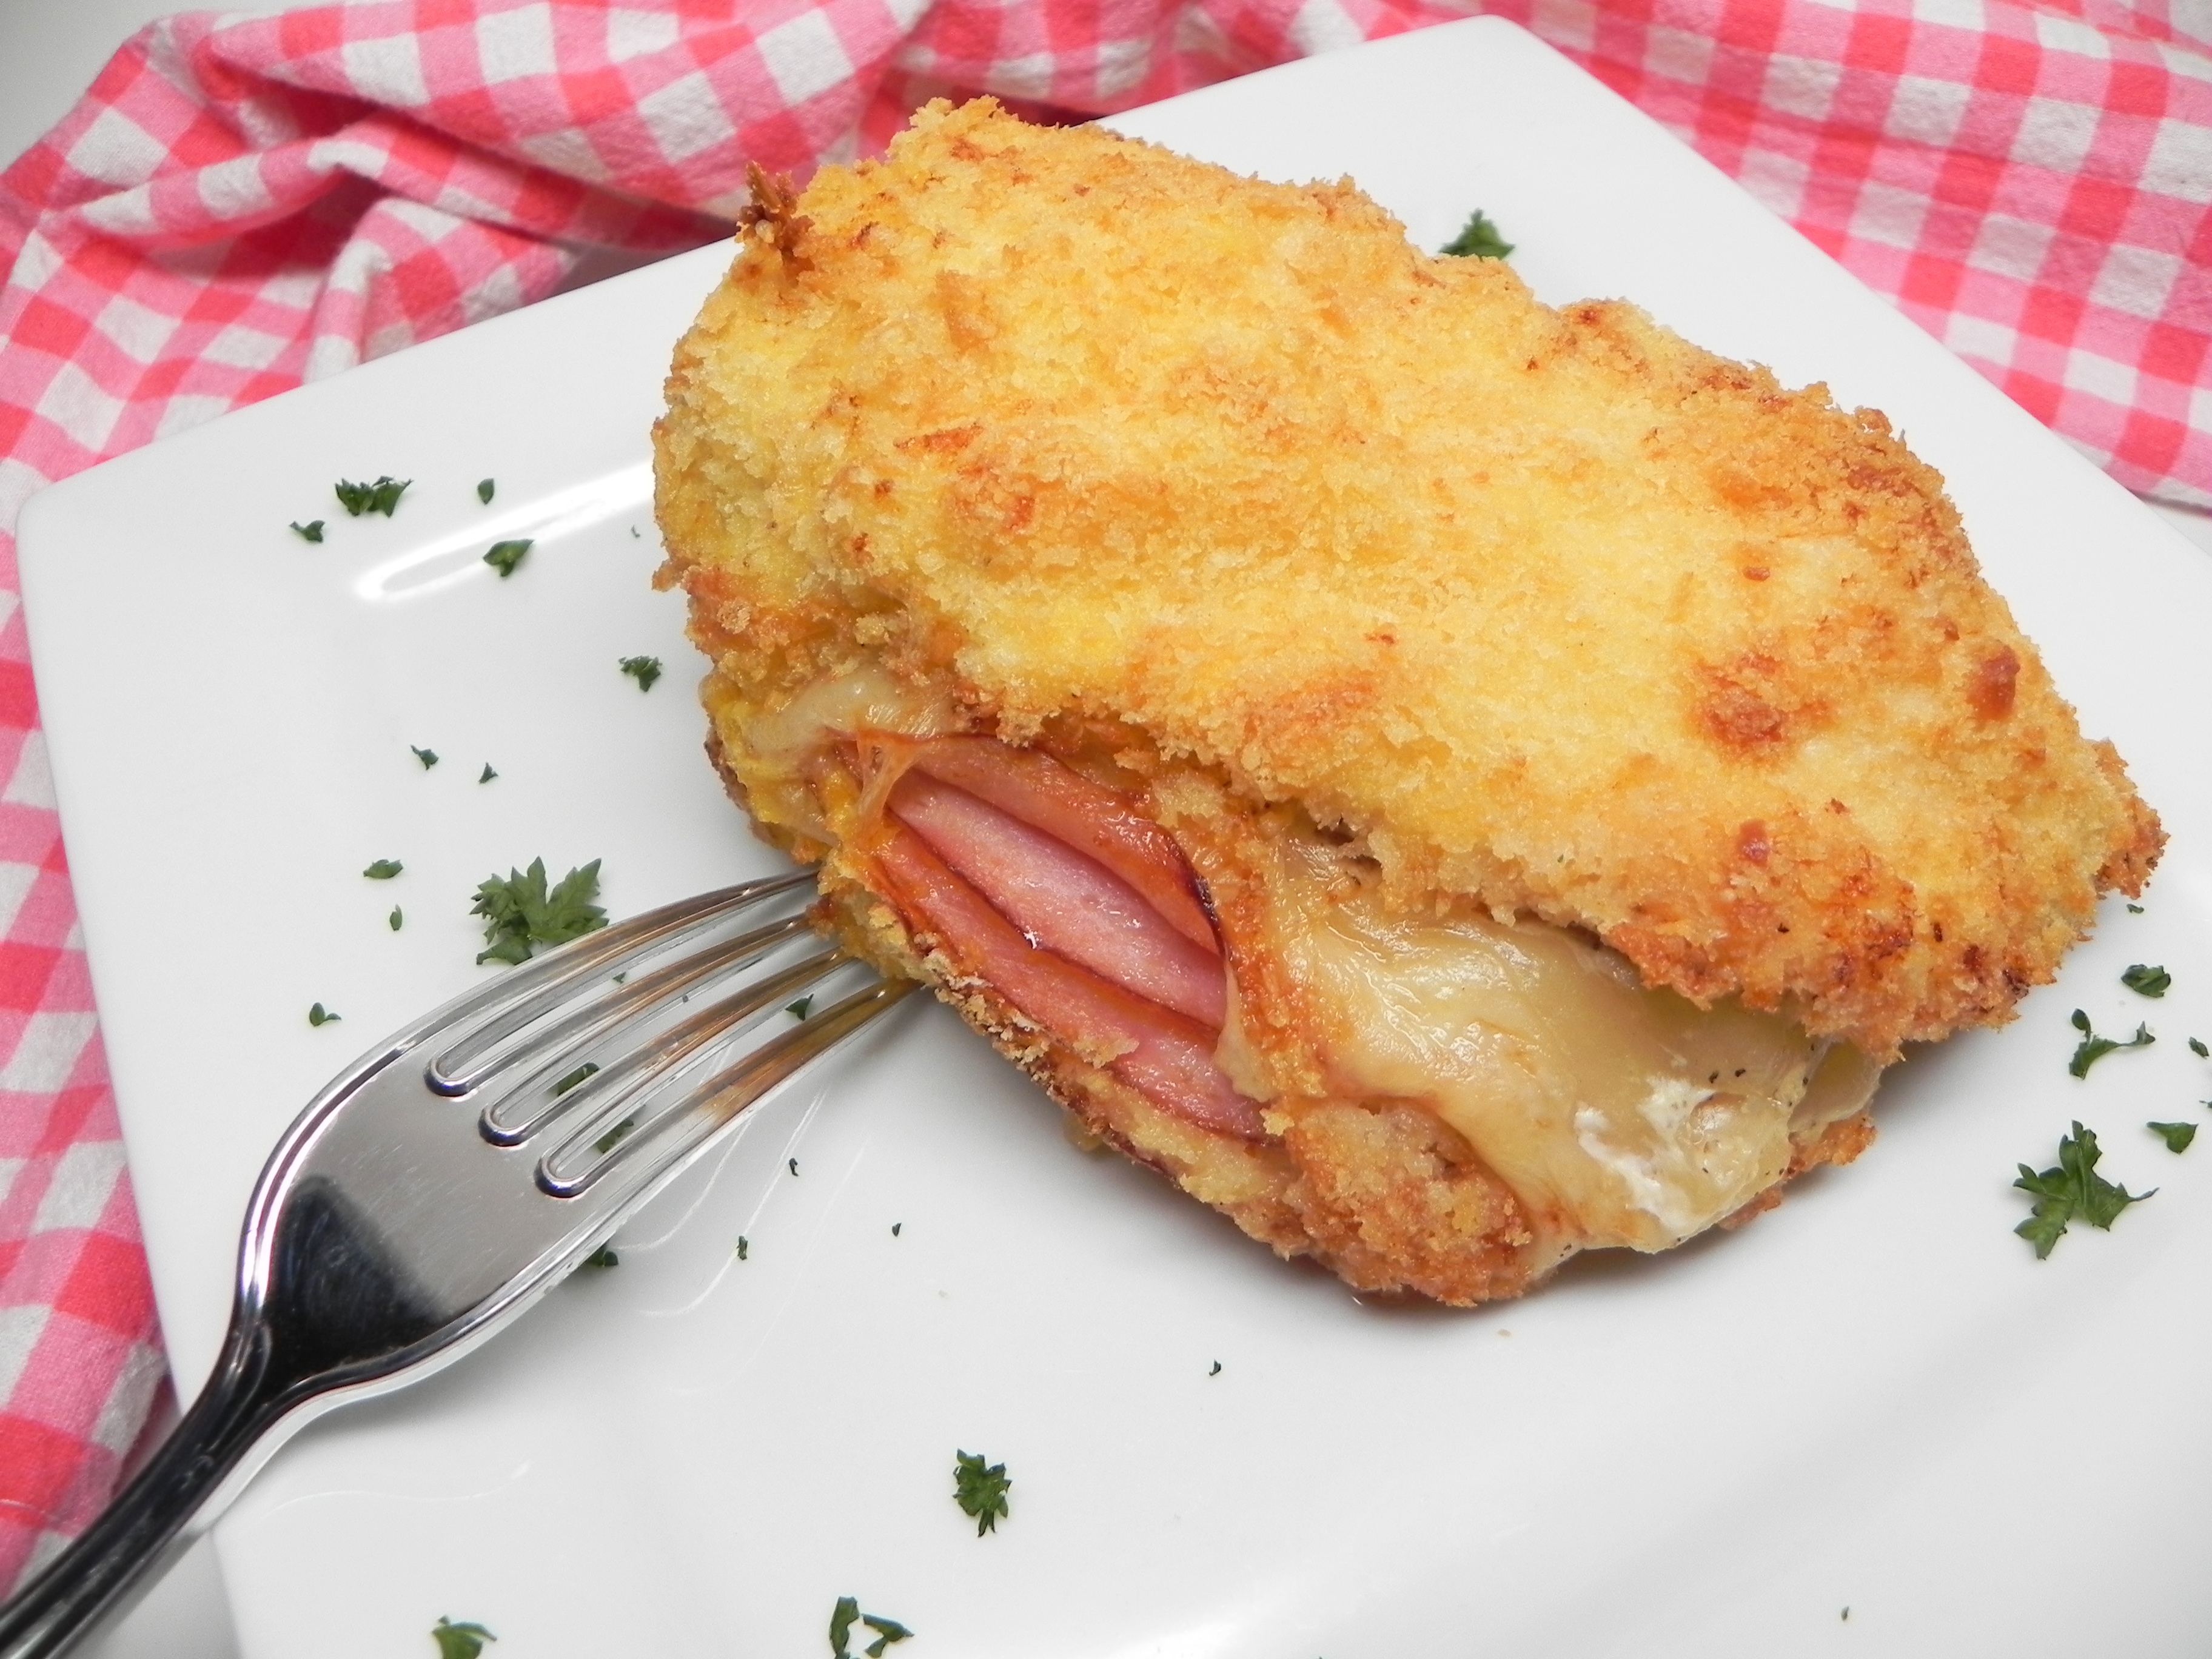 <p>This dinner for two is a fun way to get a restaurant-quality meal in no time. It features crispy chicken stuffed with ham and Swiss cheese, all the necessary ingredients of the iconic Cordon Bleu dish.</p>
                          <p>"I seldom review a recipe, but this one is truly 5 star. My only change was to use Italian bread crumbs instead of panko. The chicken was moist and and flavorful. Fantastic," write reviewer army cook.</p>
                          